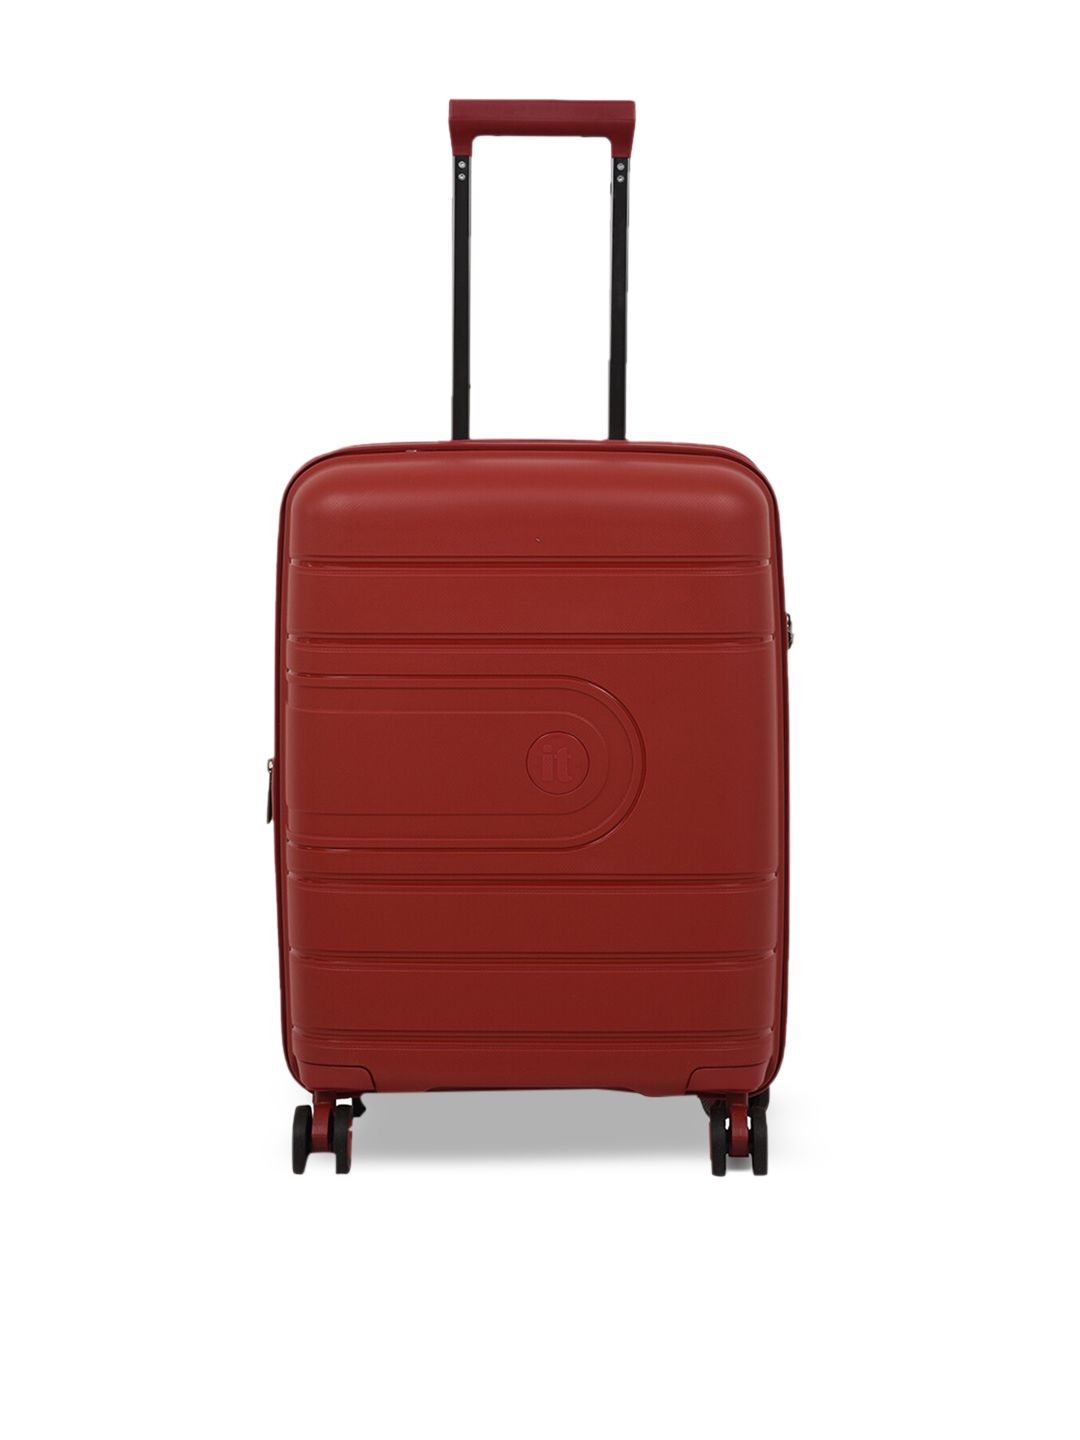 IT luggage Red Textured Trolley Suitcase Price in India